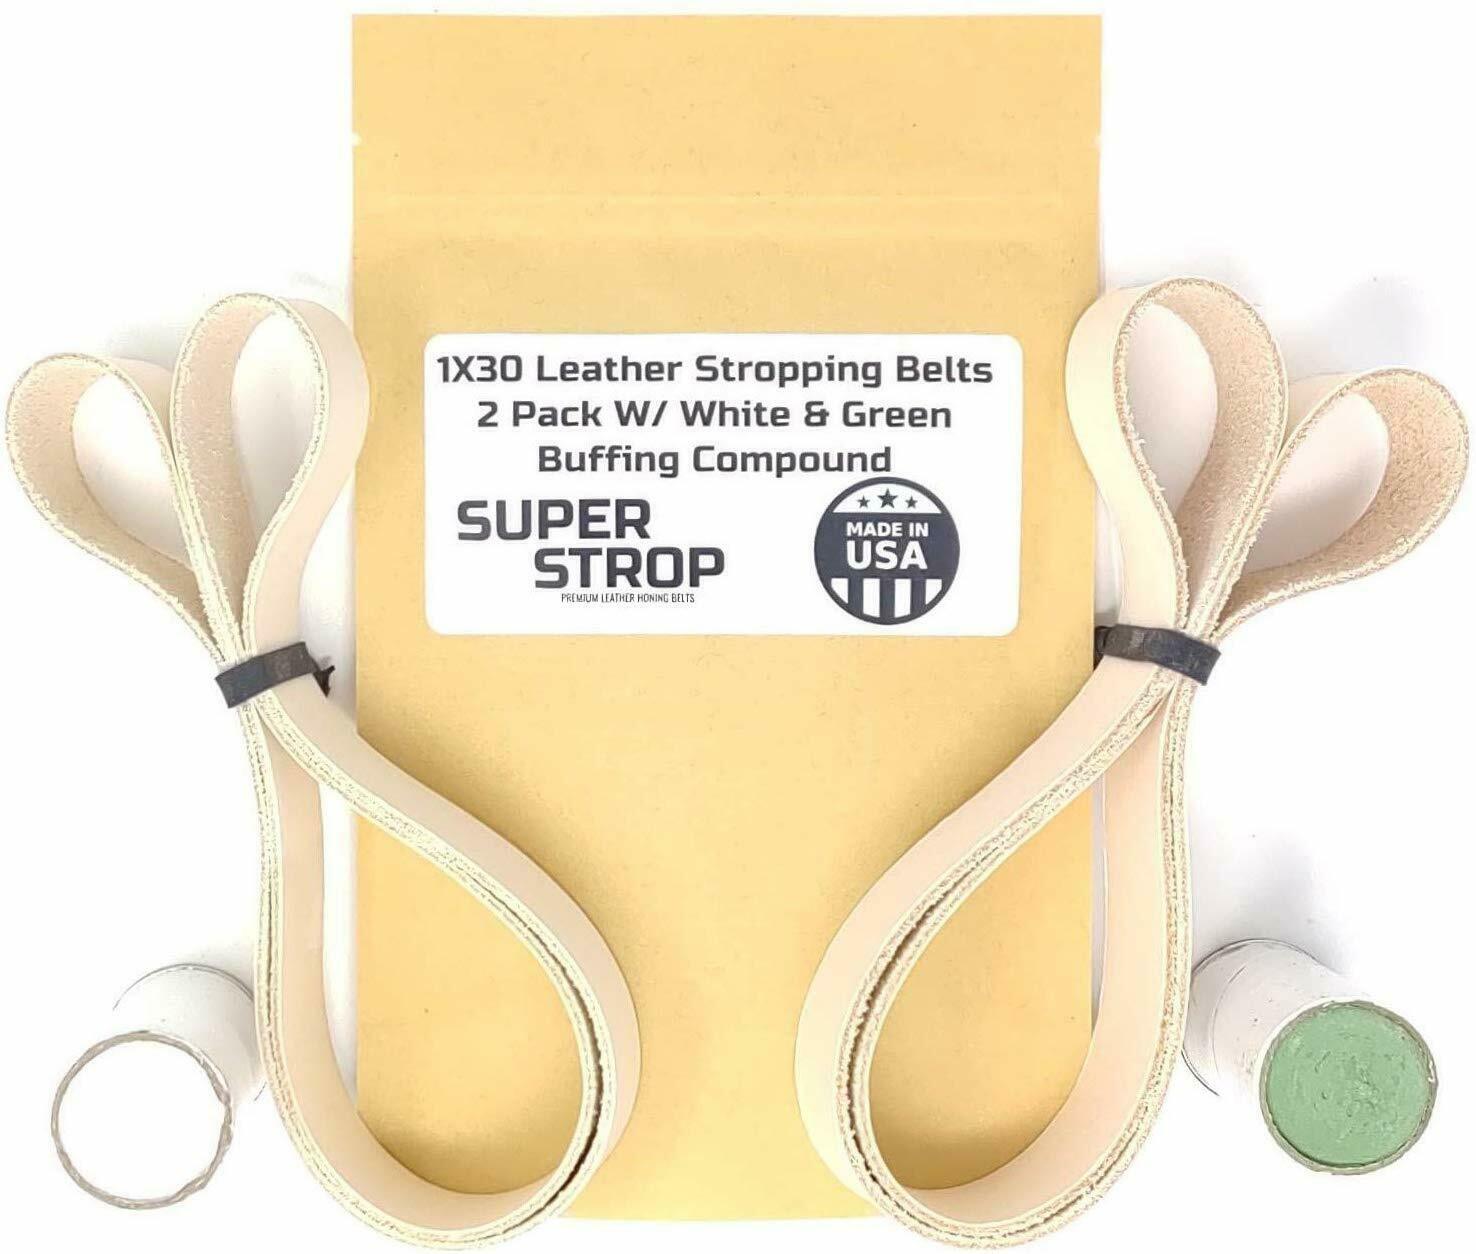 1x30 Leather Honing Polishing Belts 2 Pack With White & Green Buffing Compounds